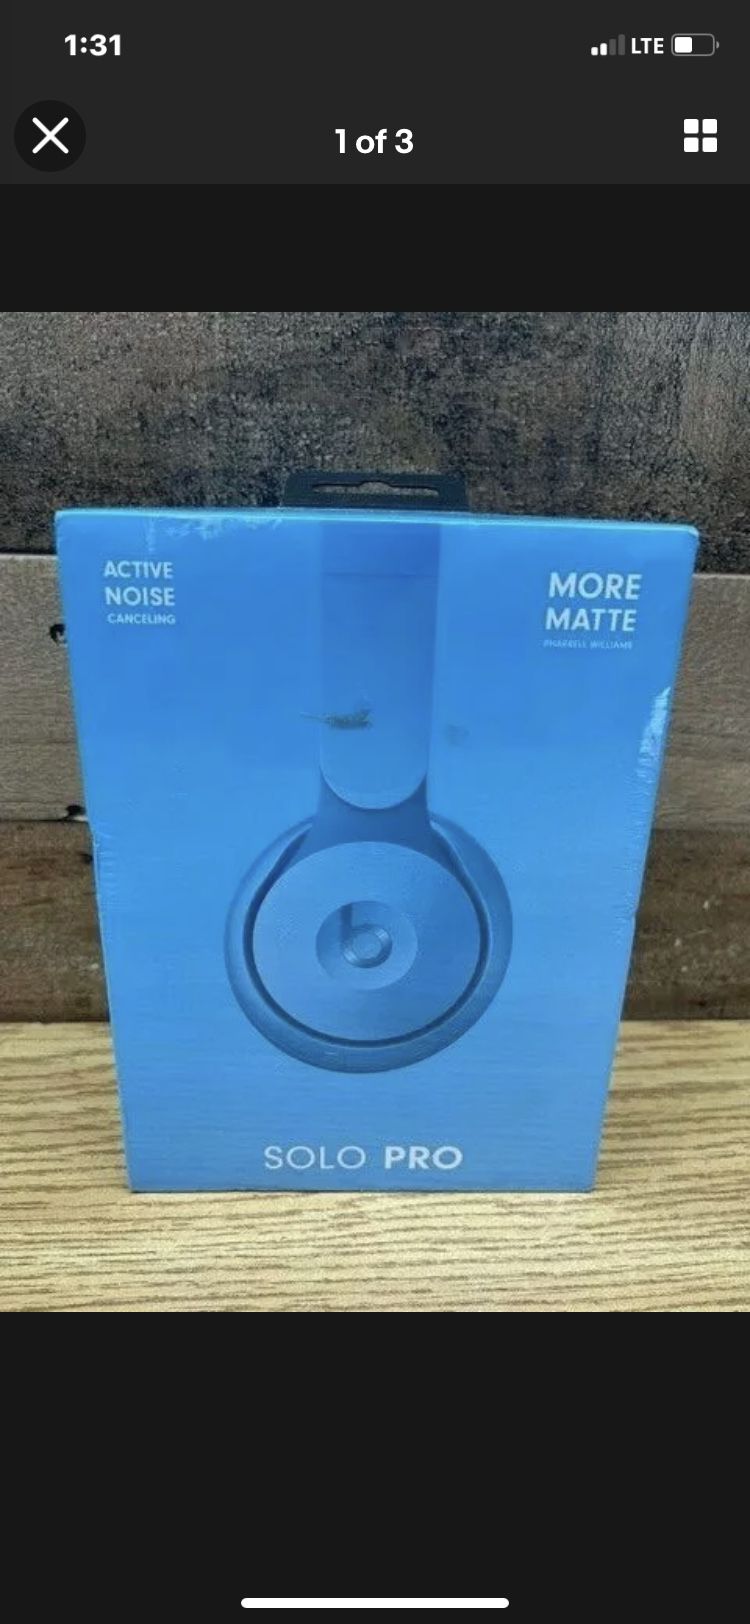 Solo Pro Matte Collection Wireless Noise Cancelling On-Ear Headphones - Blue